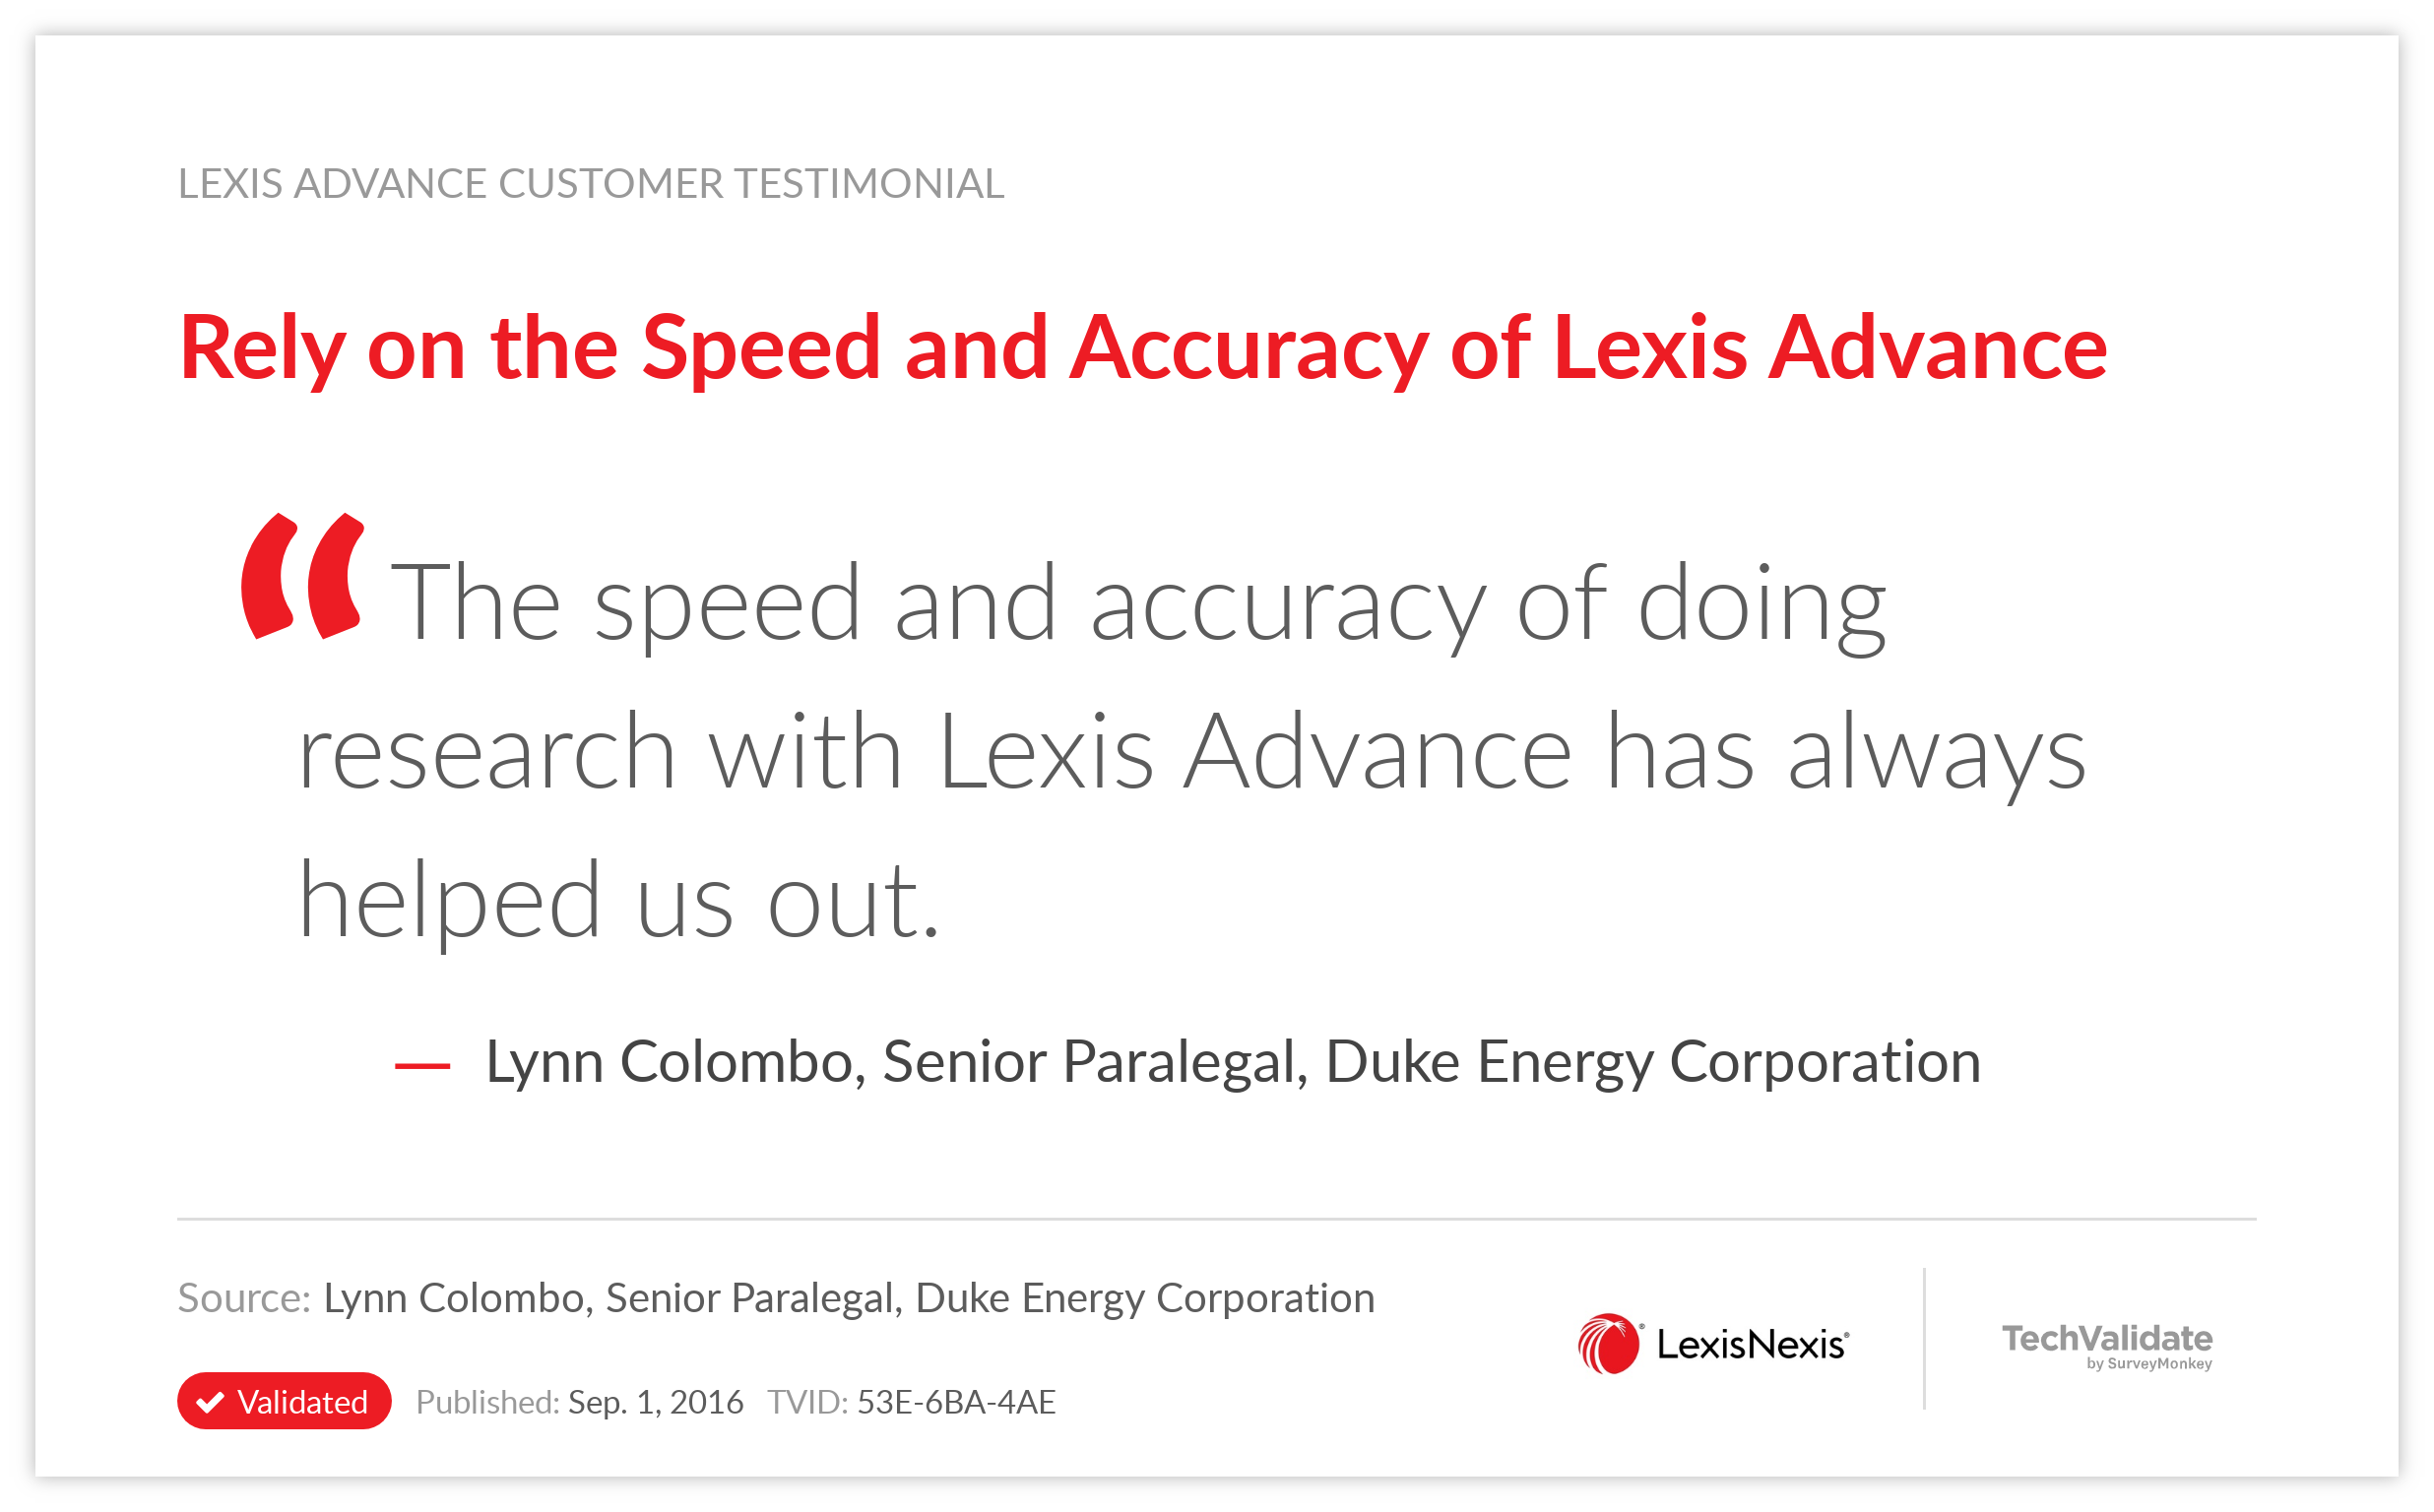 Rely on the Speed and Accuracy of Lexis Advance